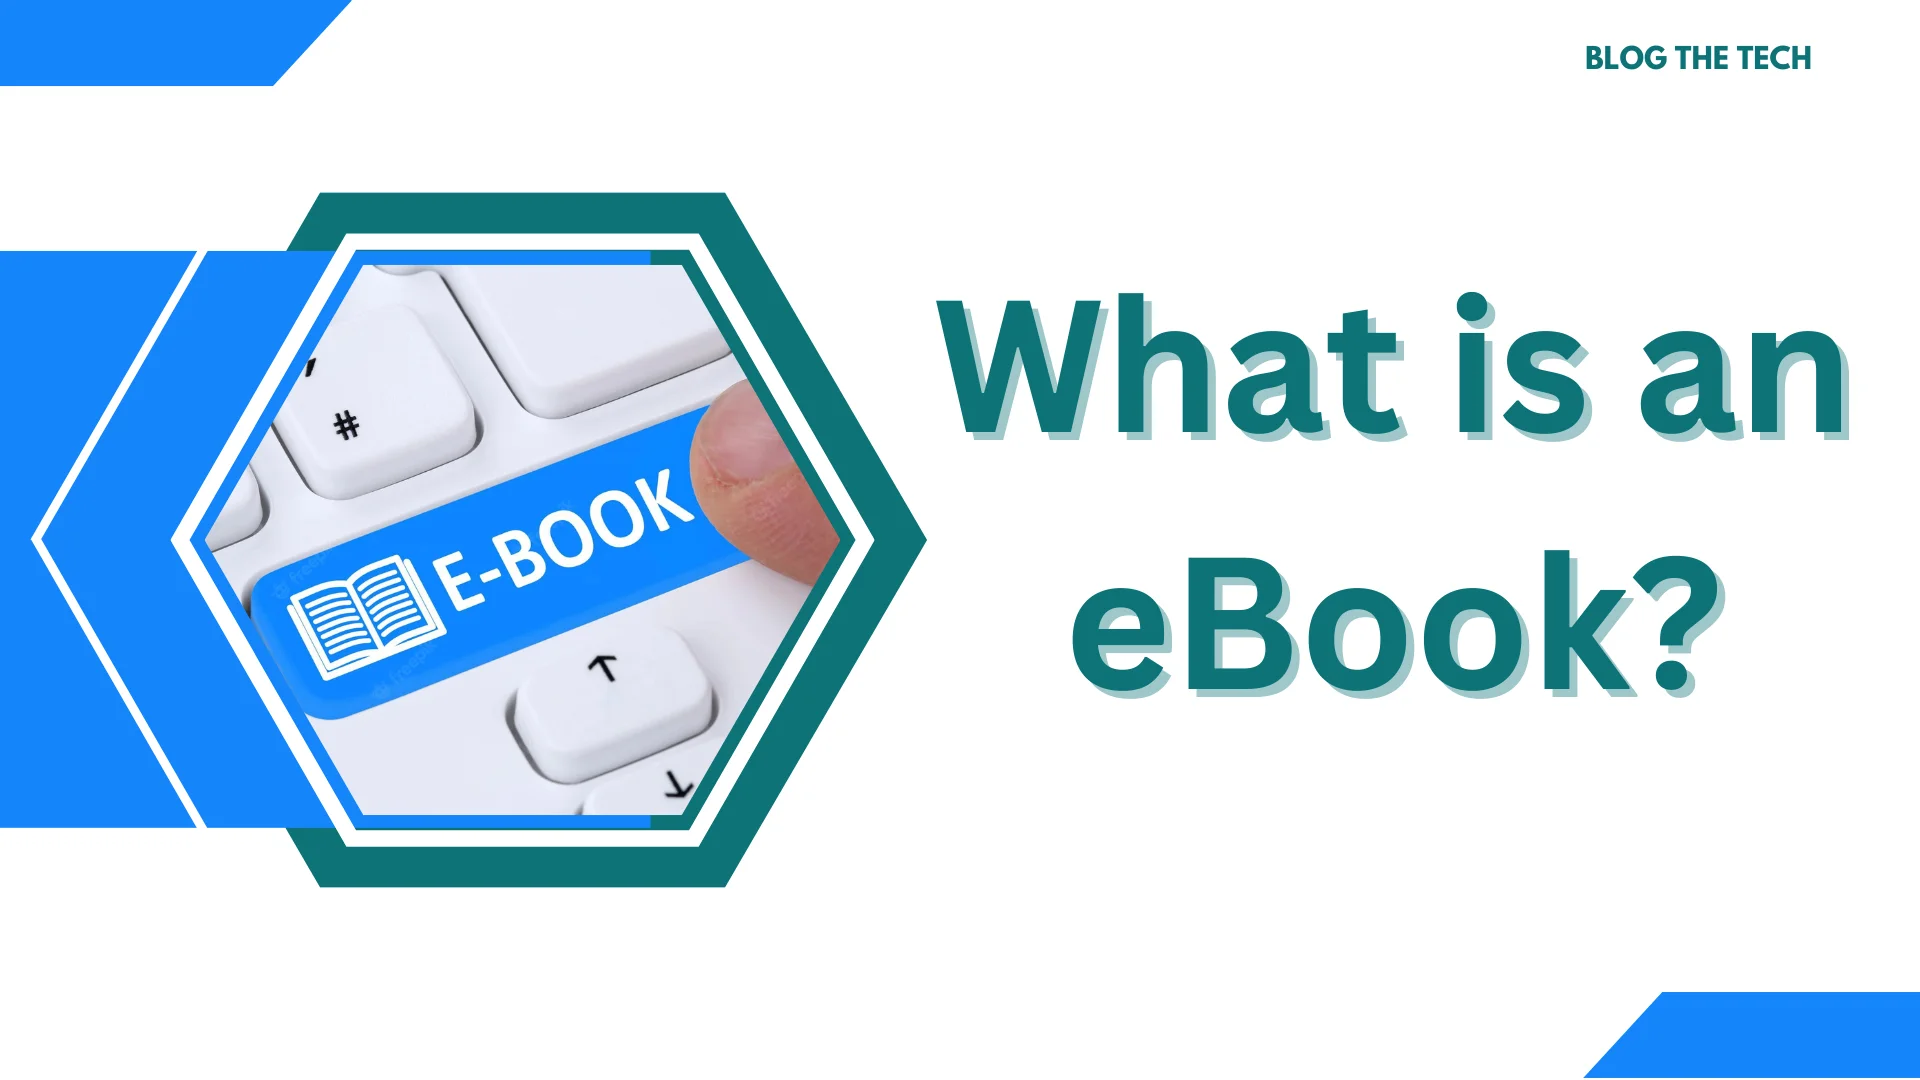 What is an eBook?